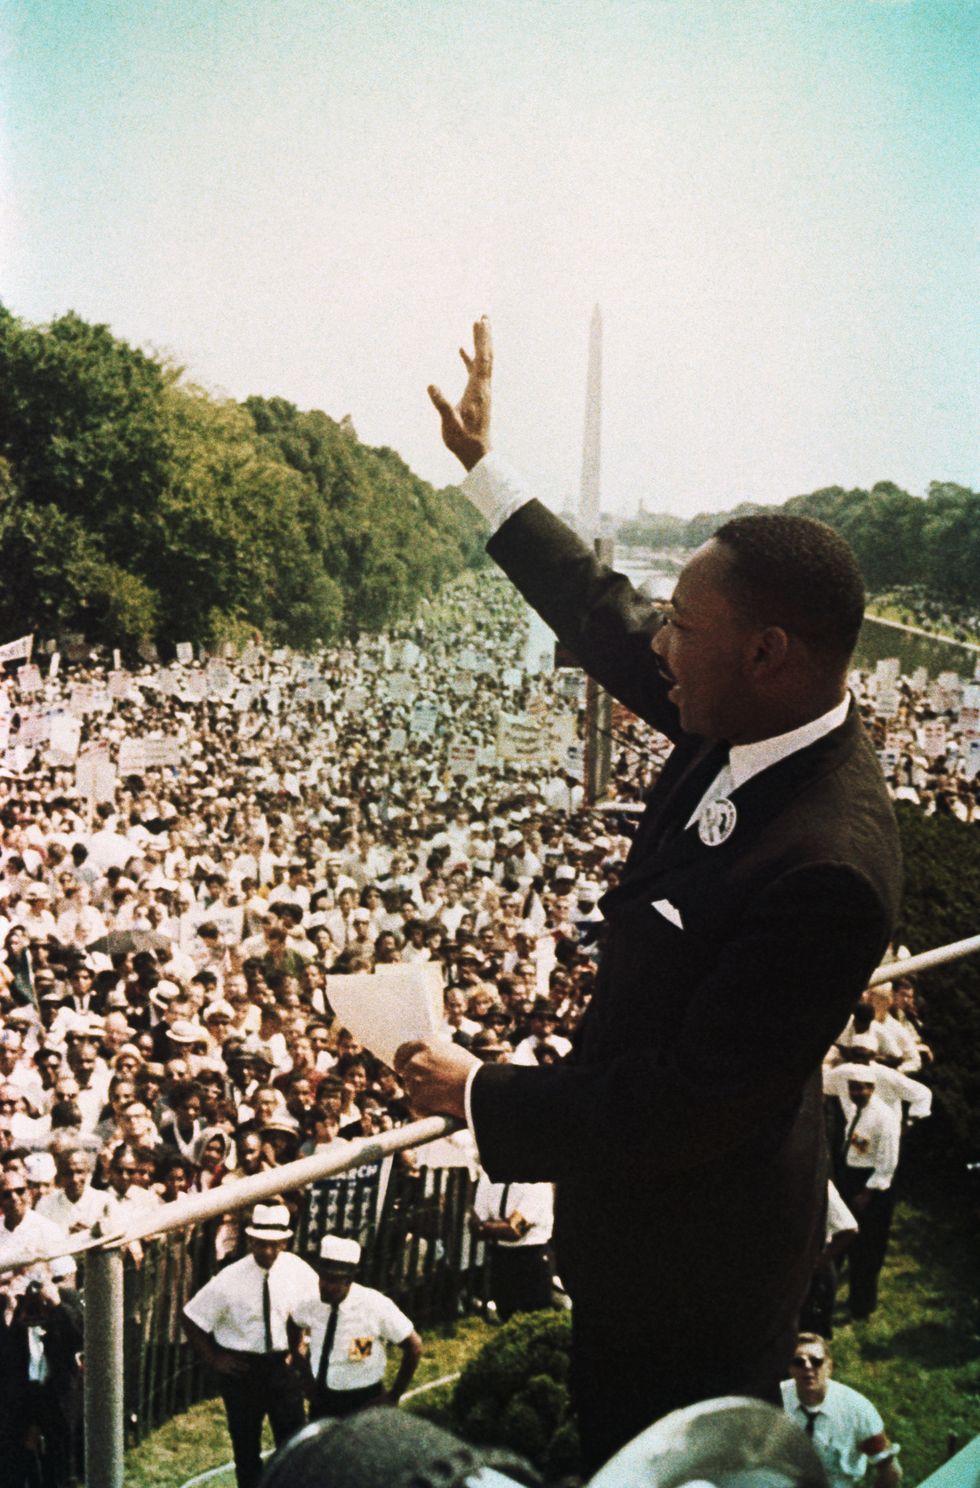 Martin Luther King Jr. waves to participants at the March on Washington on August 28, 1963